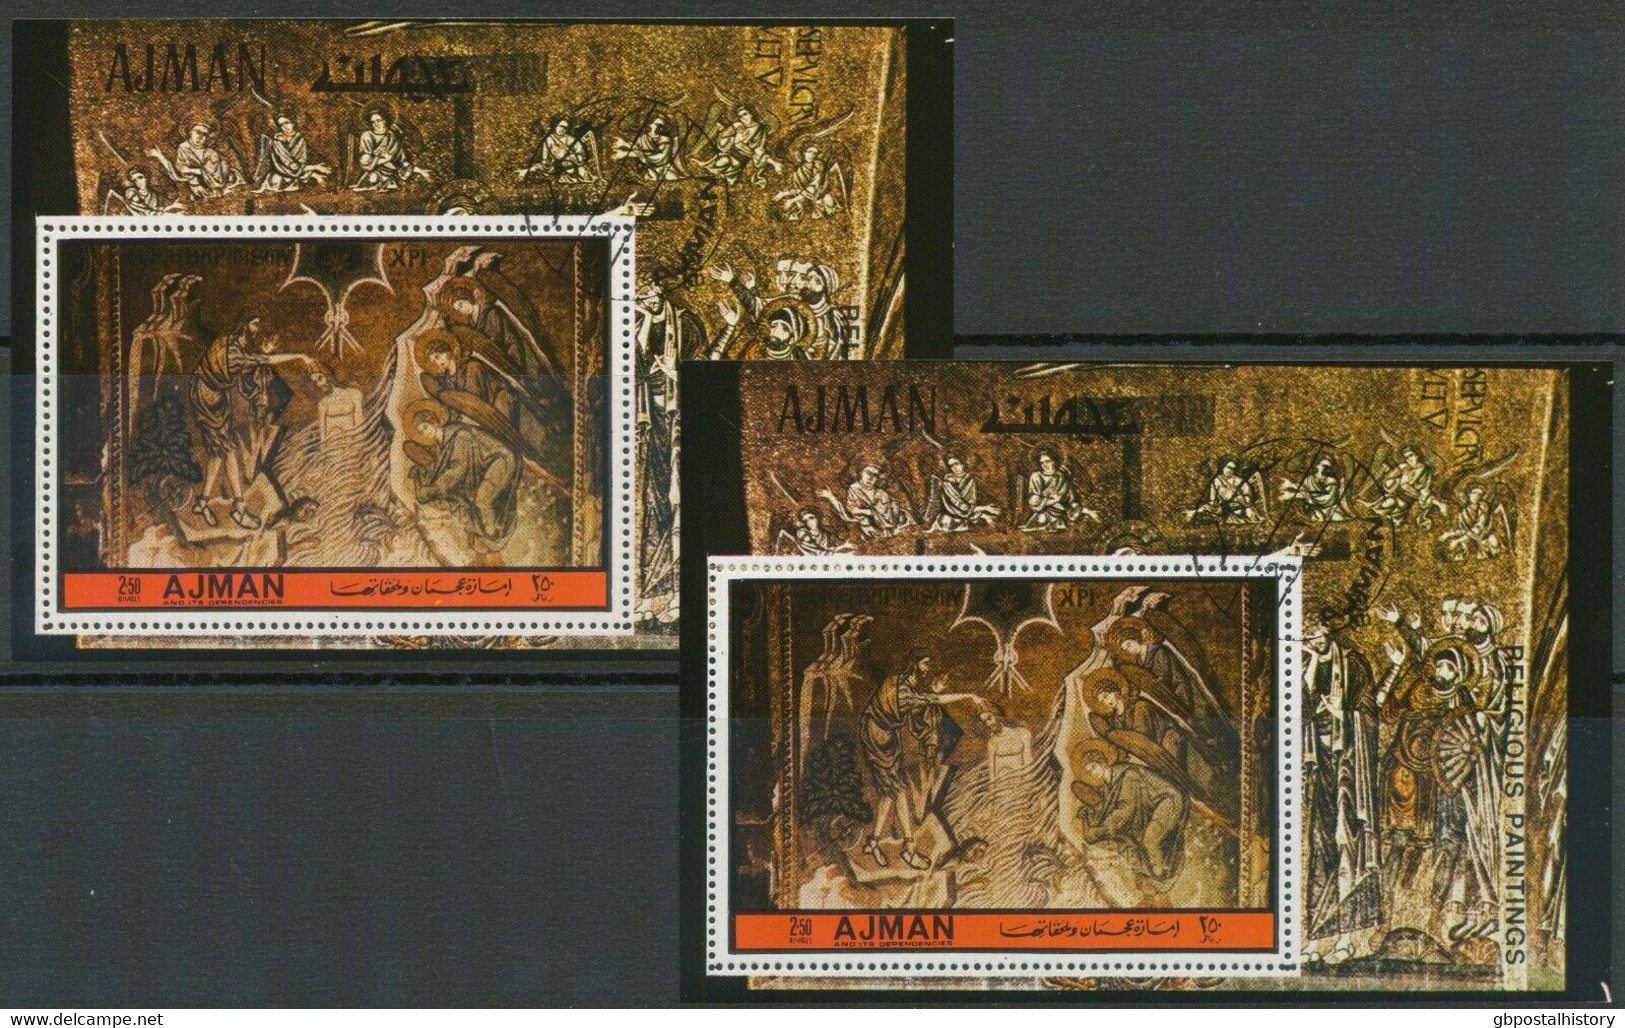 AJMAN 1972 Religious Paintings 2.50 R. Superb Used MS VARIETY: THICK CARDBOARD-LIKE PAPER - Adschman